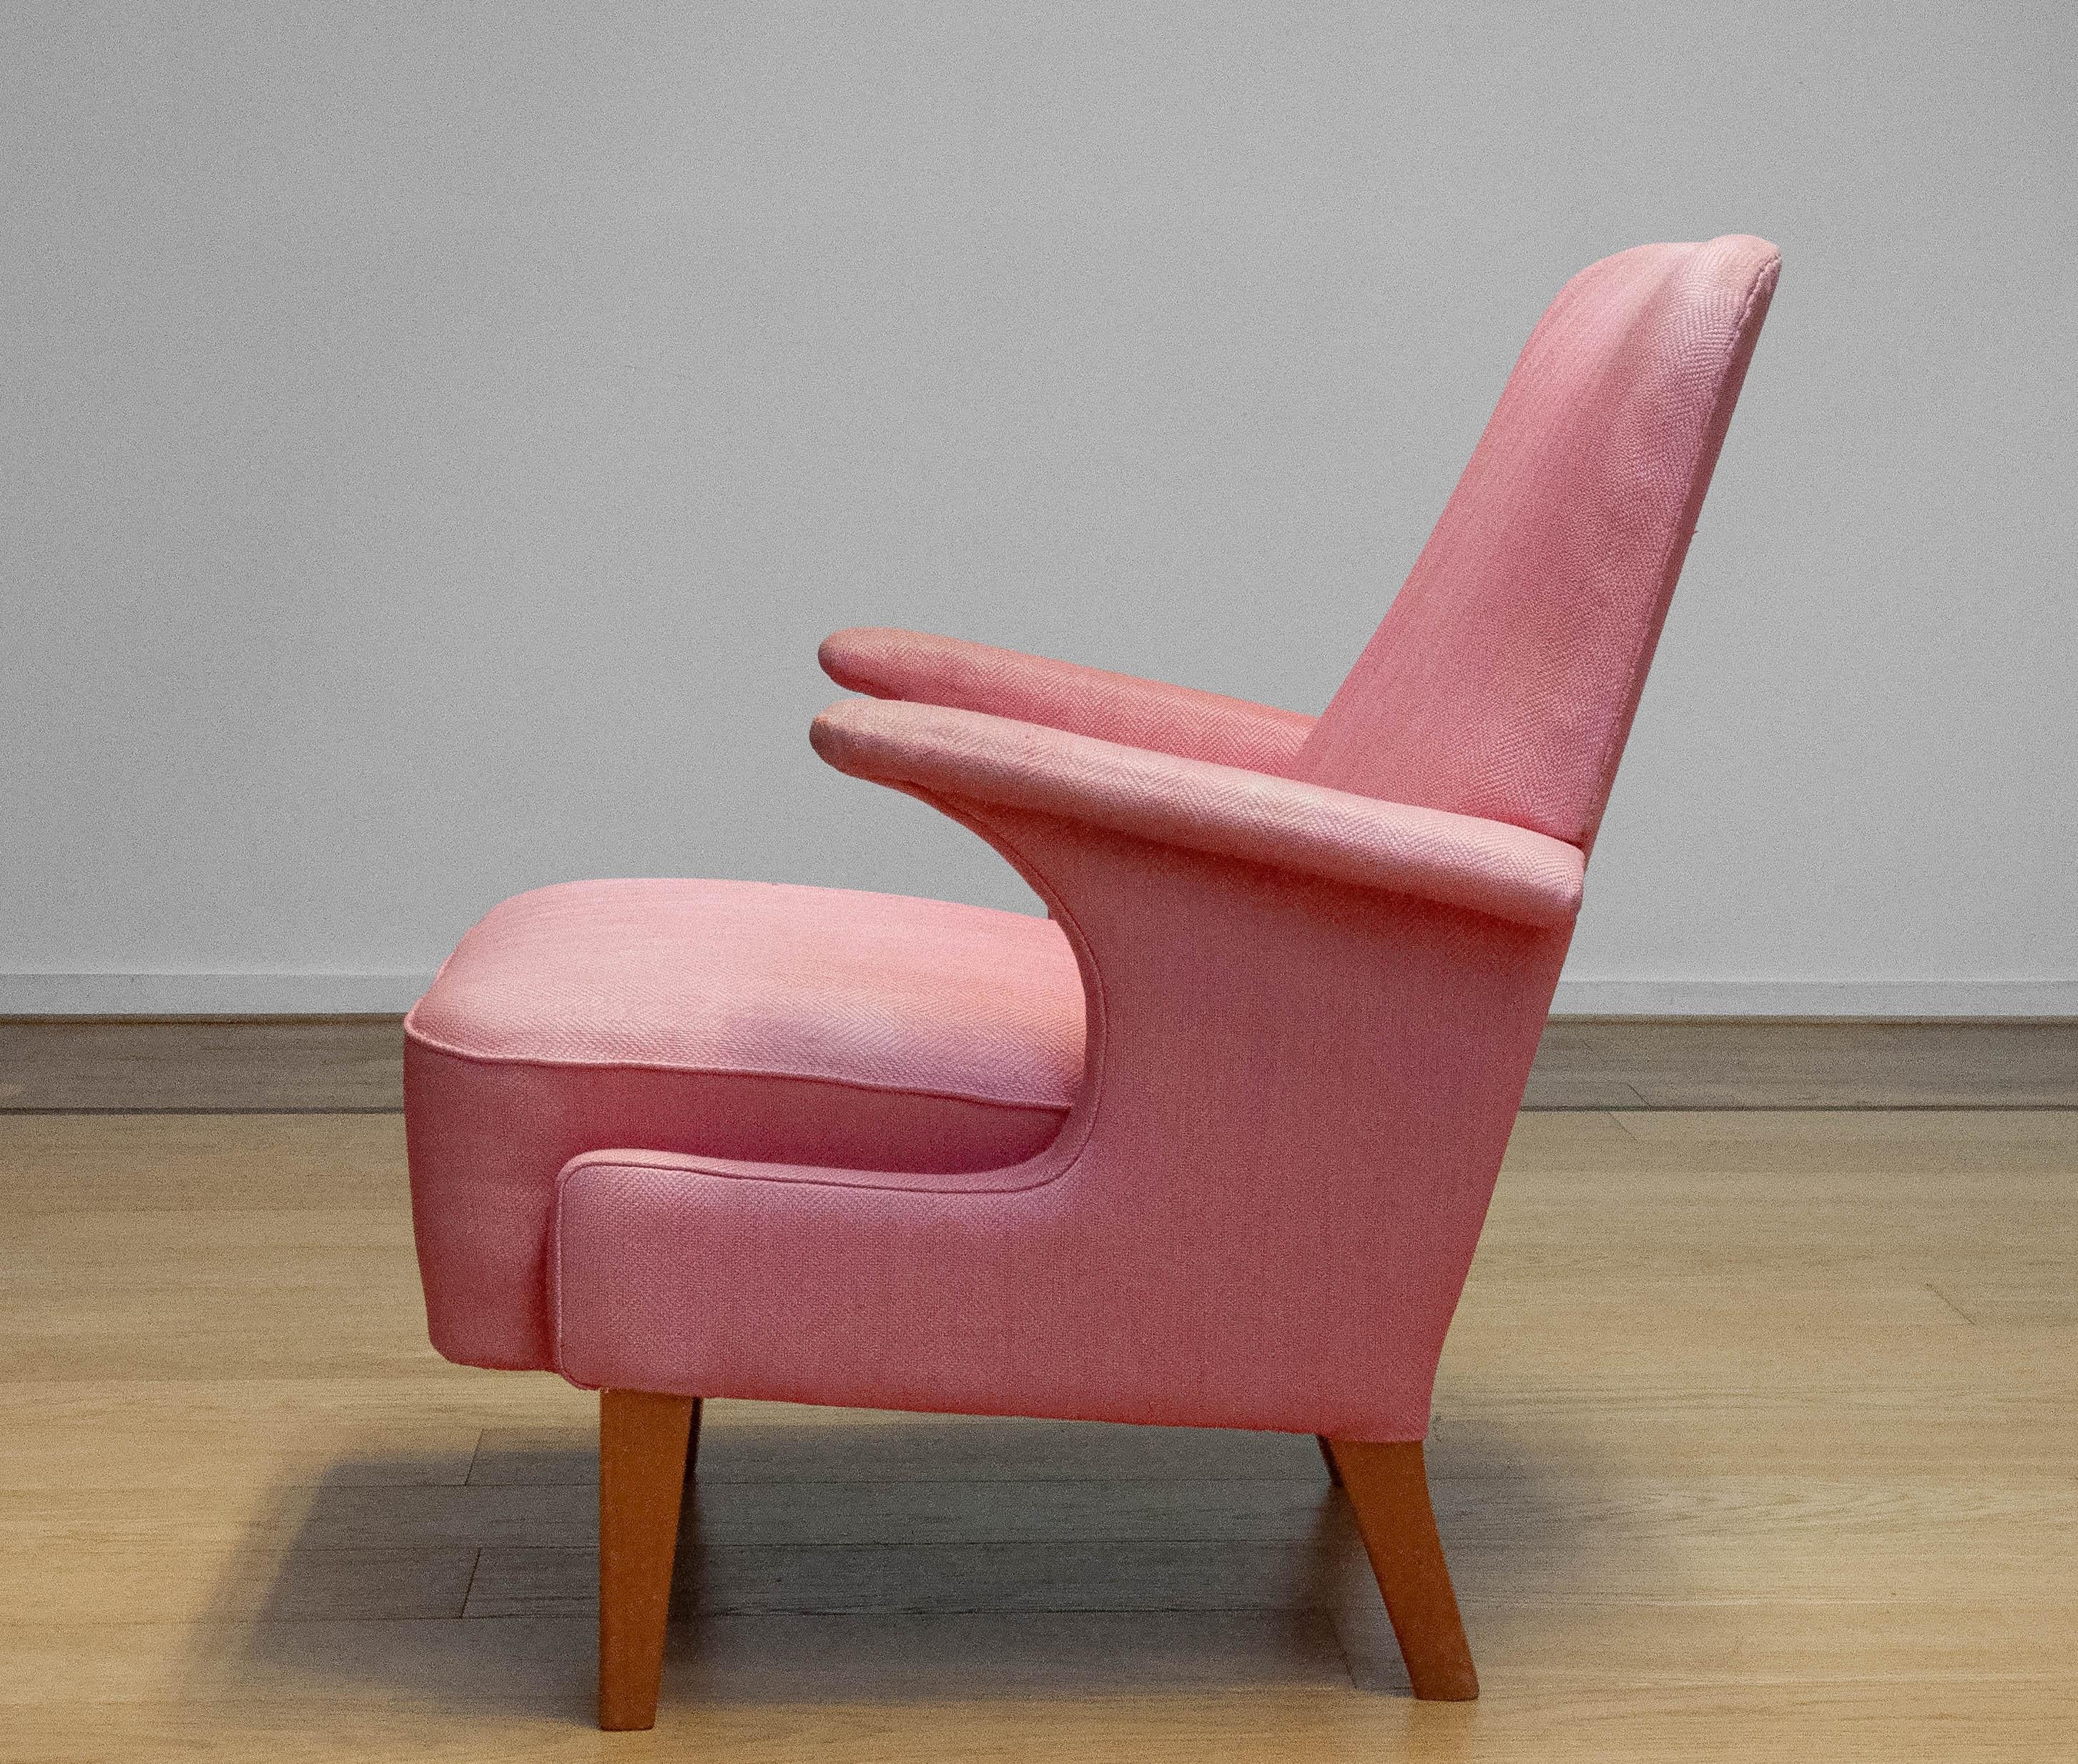 1950 Armchair / Lounge Chair With Powder Pink Wool Upholstery By Dux From Sweden For Sale 1